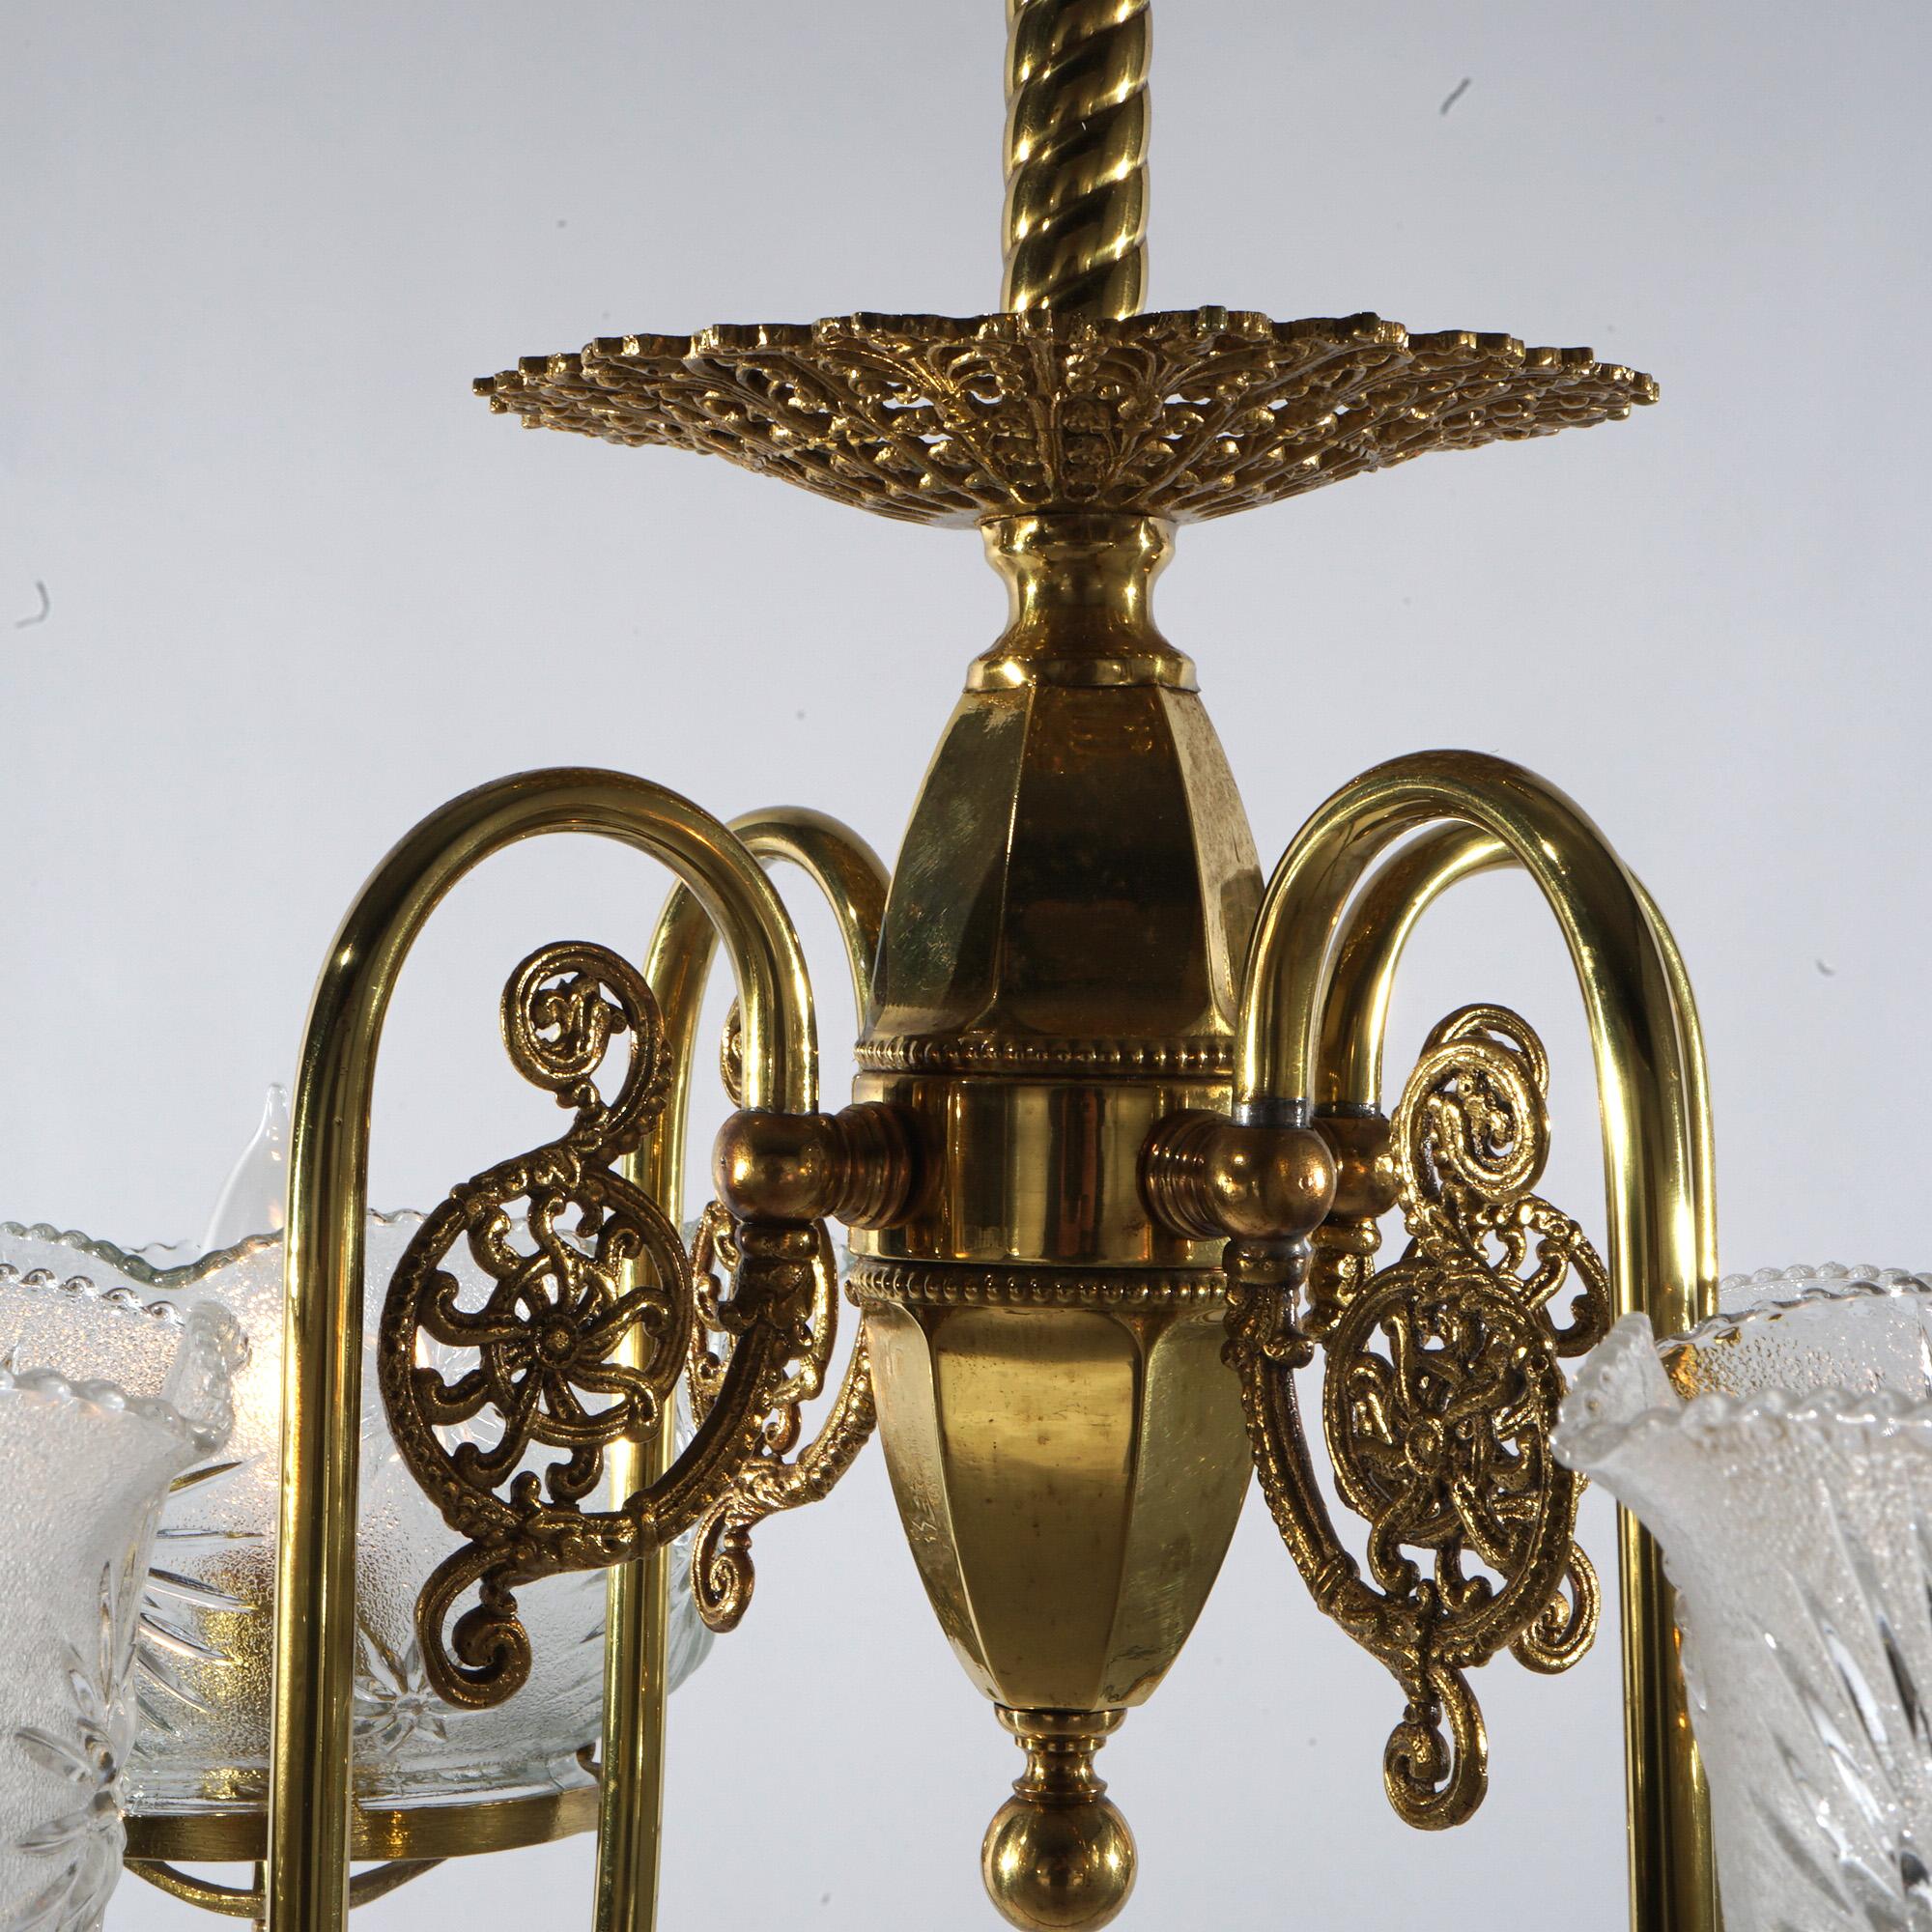 Antique Brass Four-Arm Gas Light Hanging Fixture with Glass Shades C1880 For Sale 5